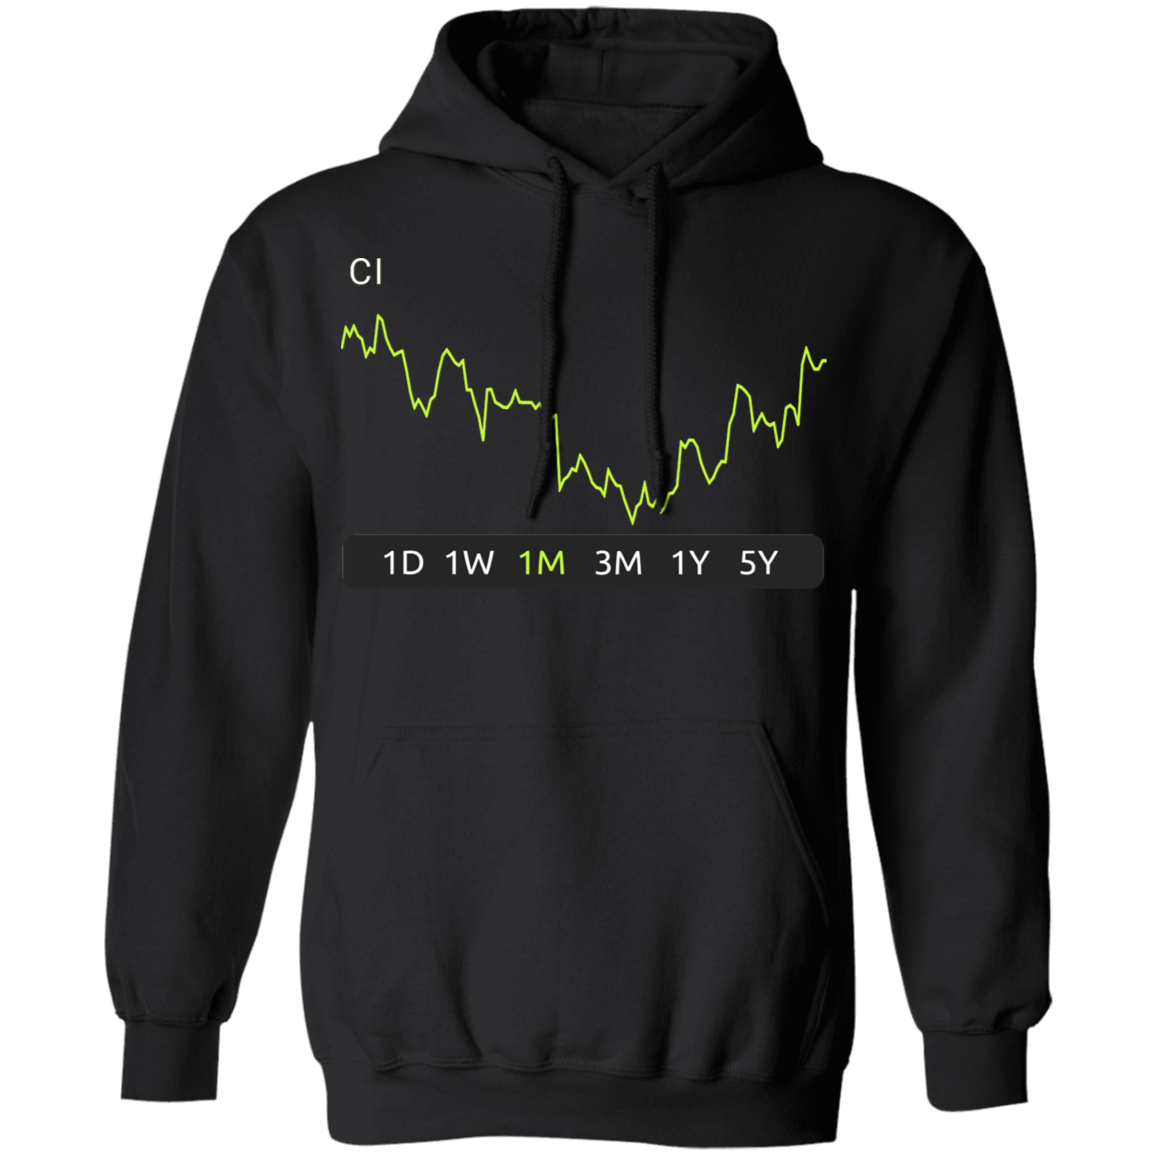 CI Stock 1m Pullover Hoodie